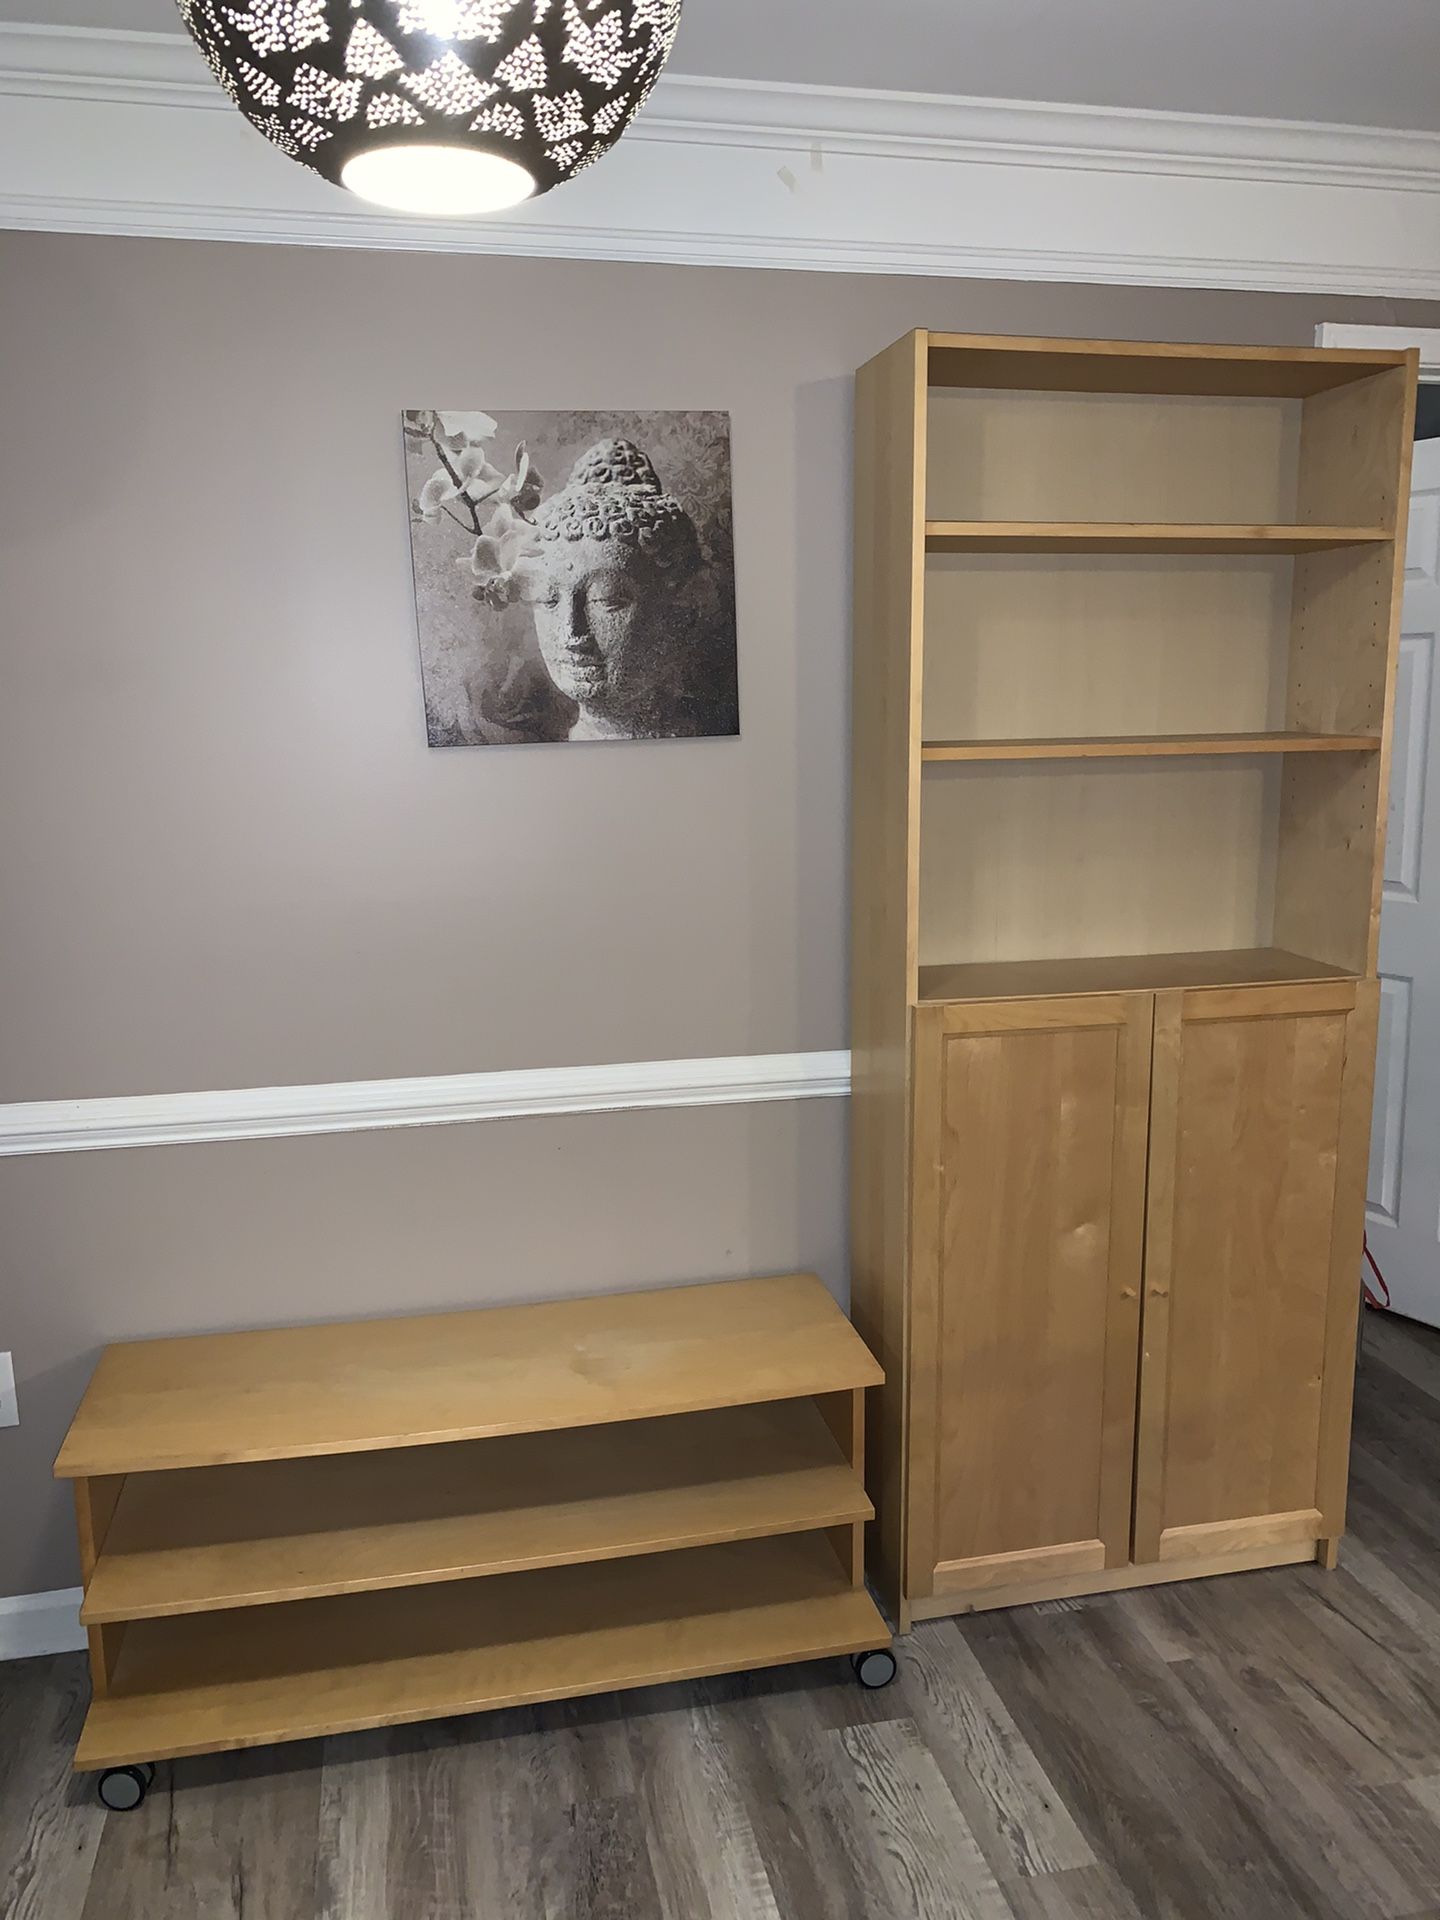 IKEA Cabinets With Shelves And TV Stand With Shelves